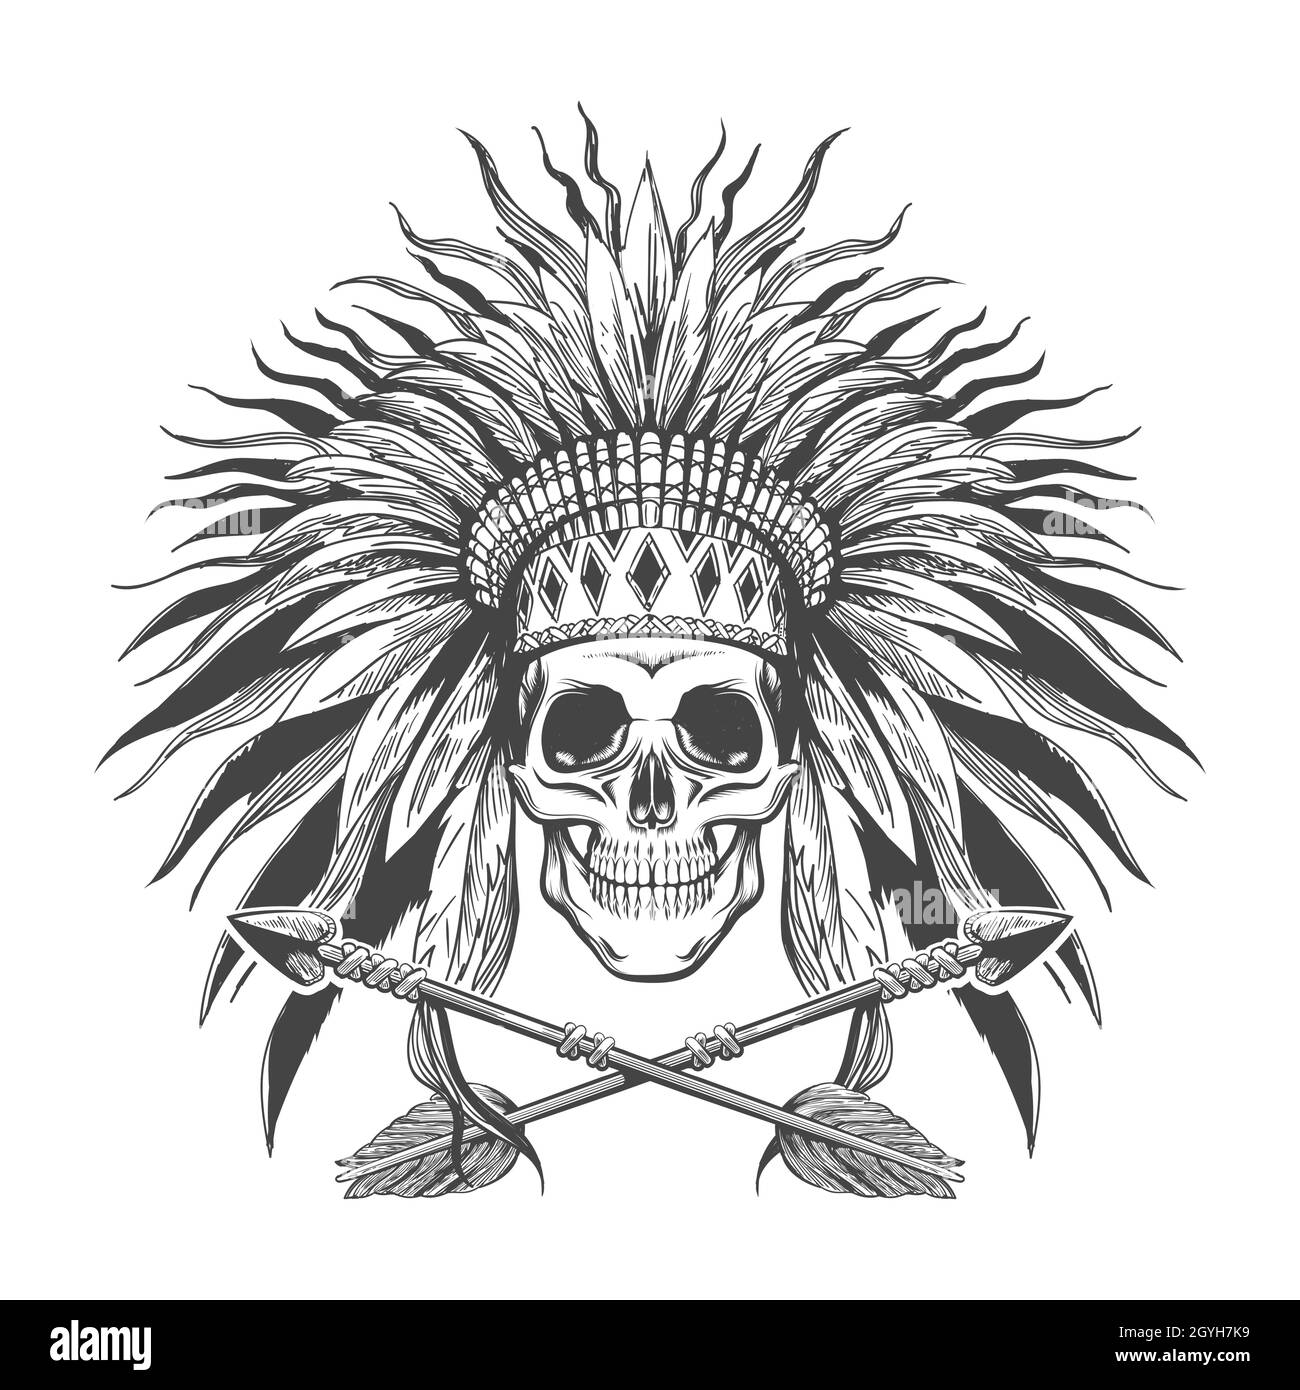 Human skull wearing native american war bonnet and two crossed arrows tattoo. Vector illustration. Stock Vector